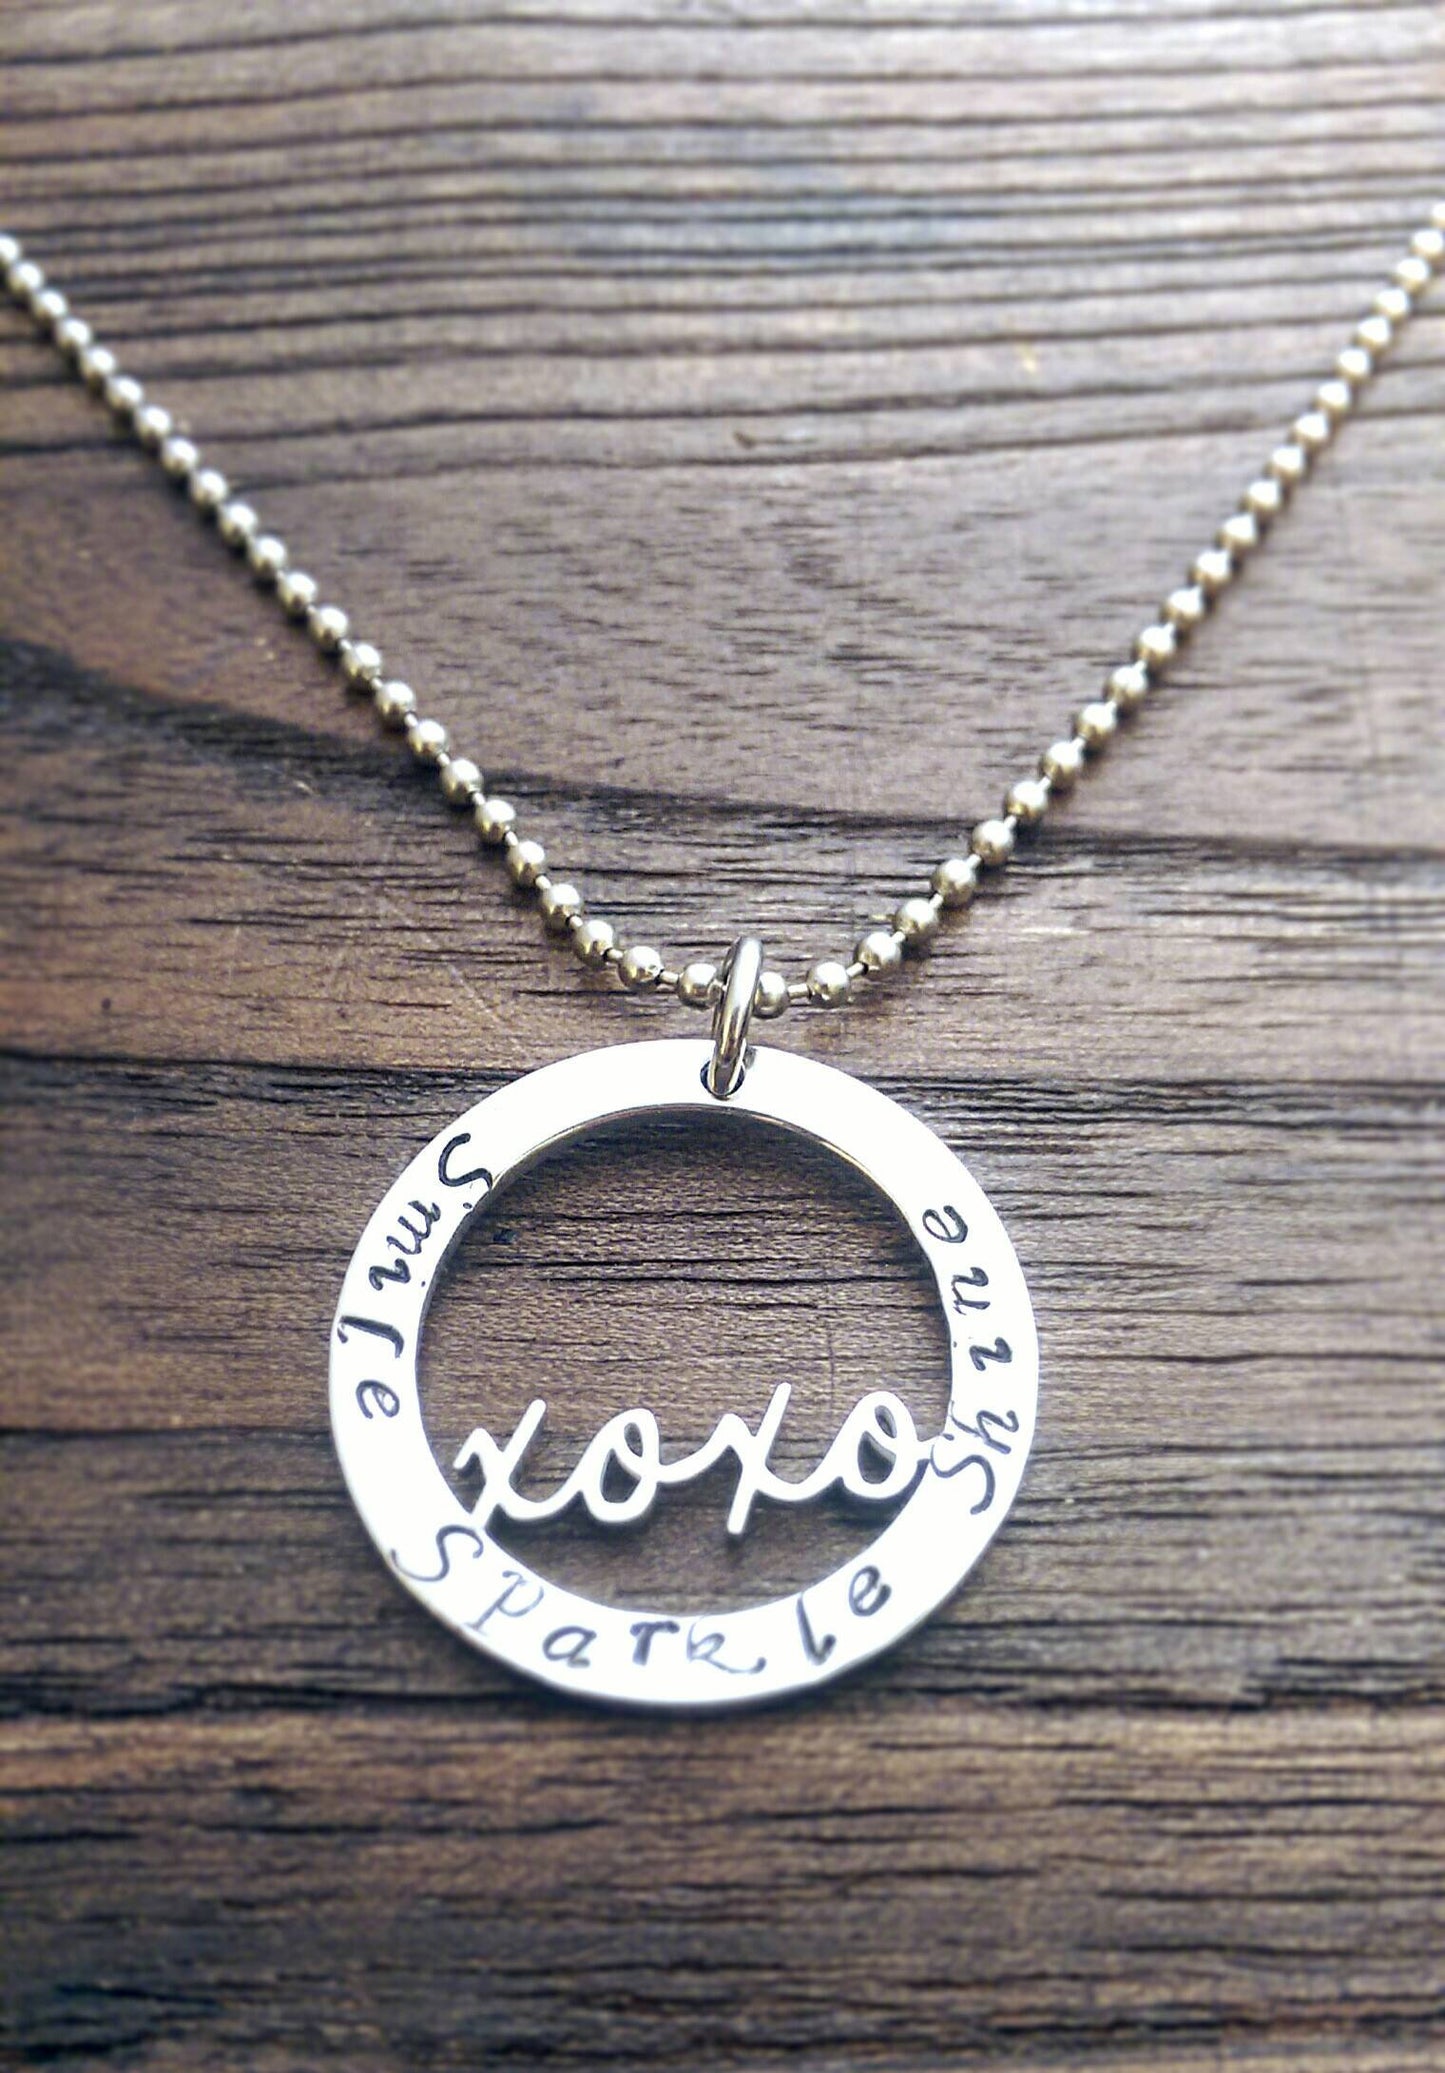 Hand Stamped Personalised Circle Necklace X O Kiss Hug  Design 32mm Silver Necklace "Smile Sparkle Shine" Ready Made ready to post.